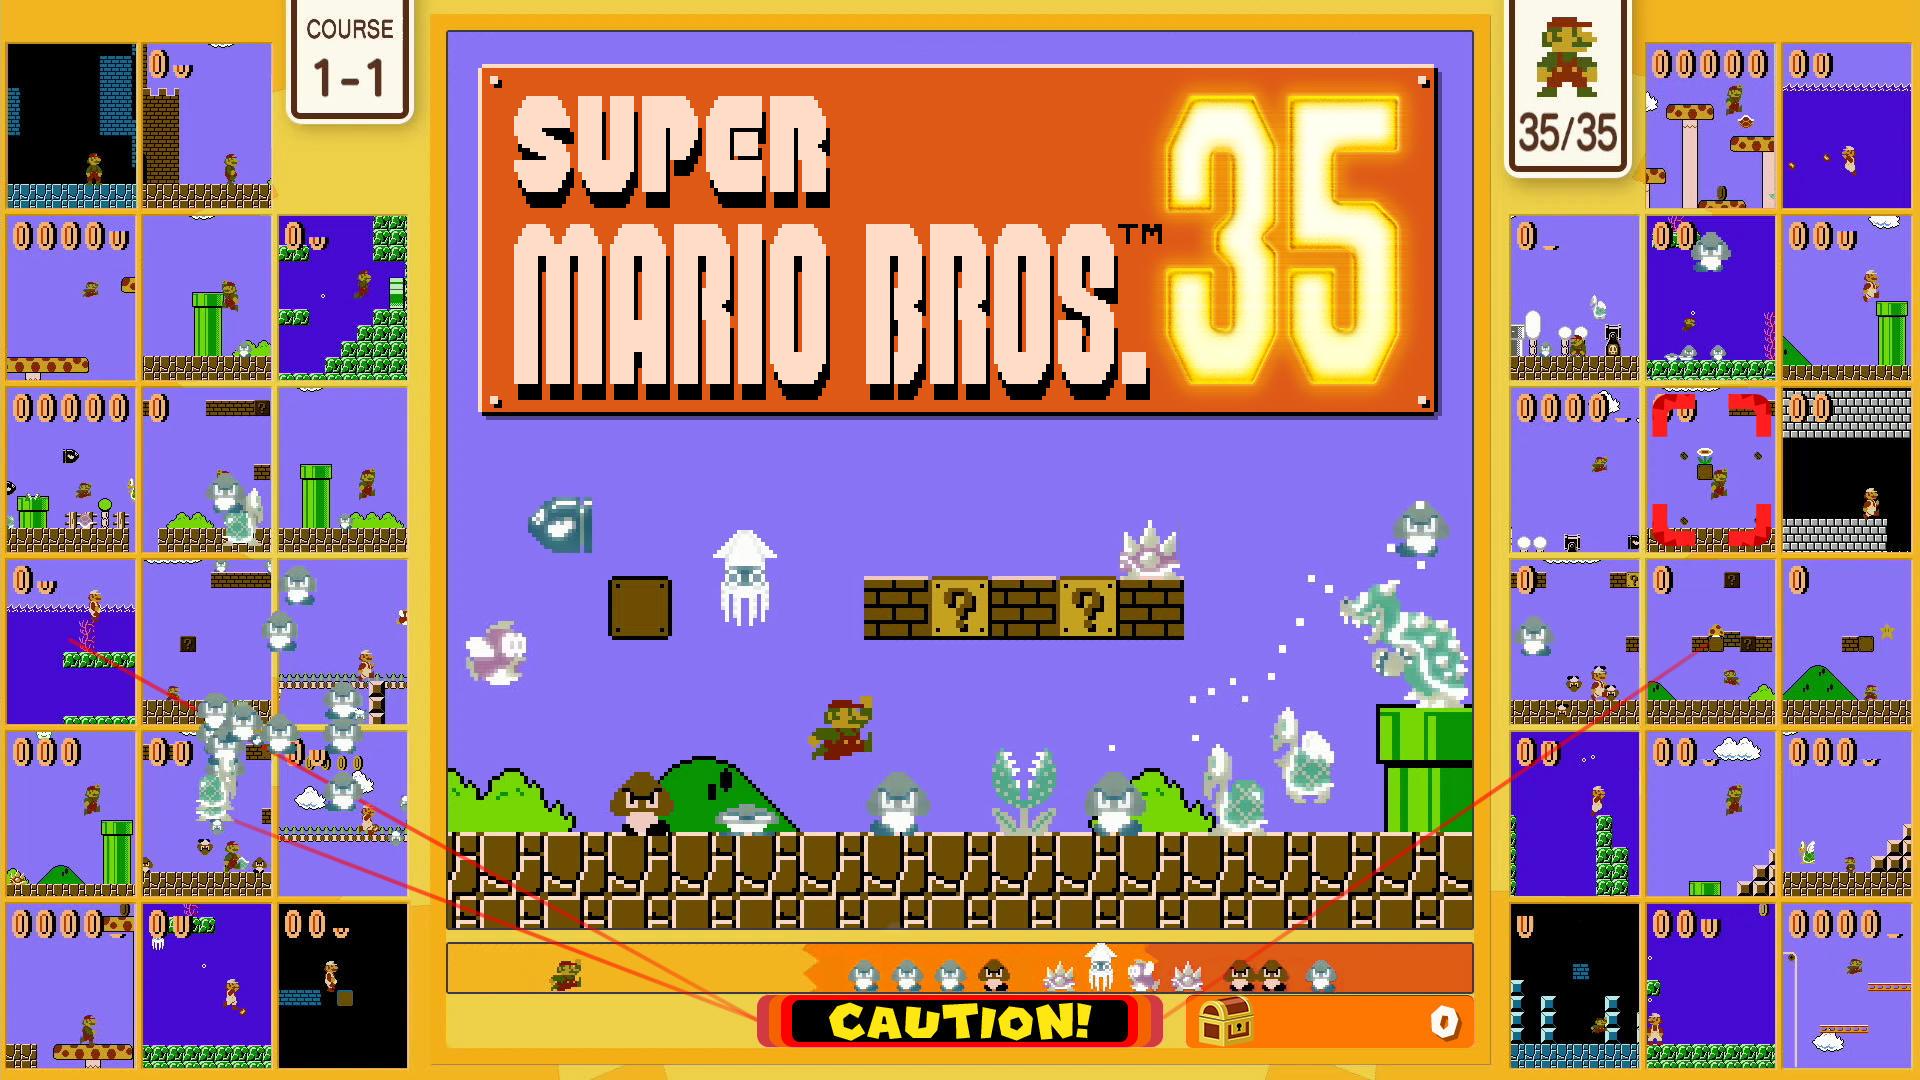 Super Mario Bros 35 for Nintendo Switch out now for Nintendo Switch Online members